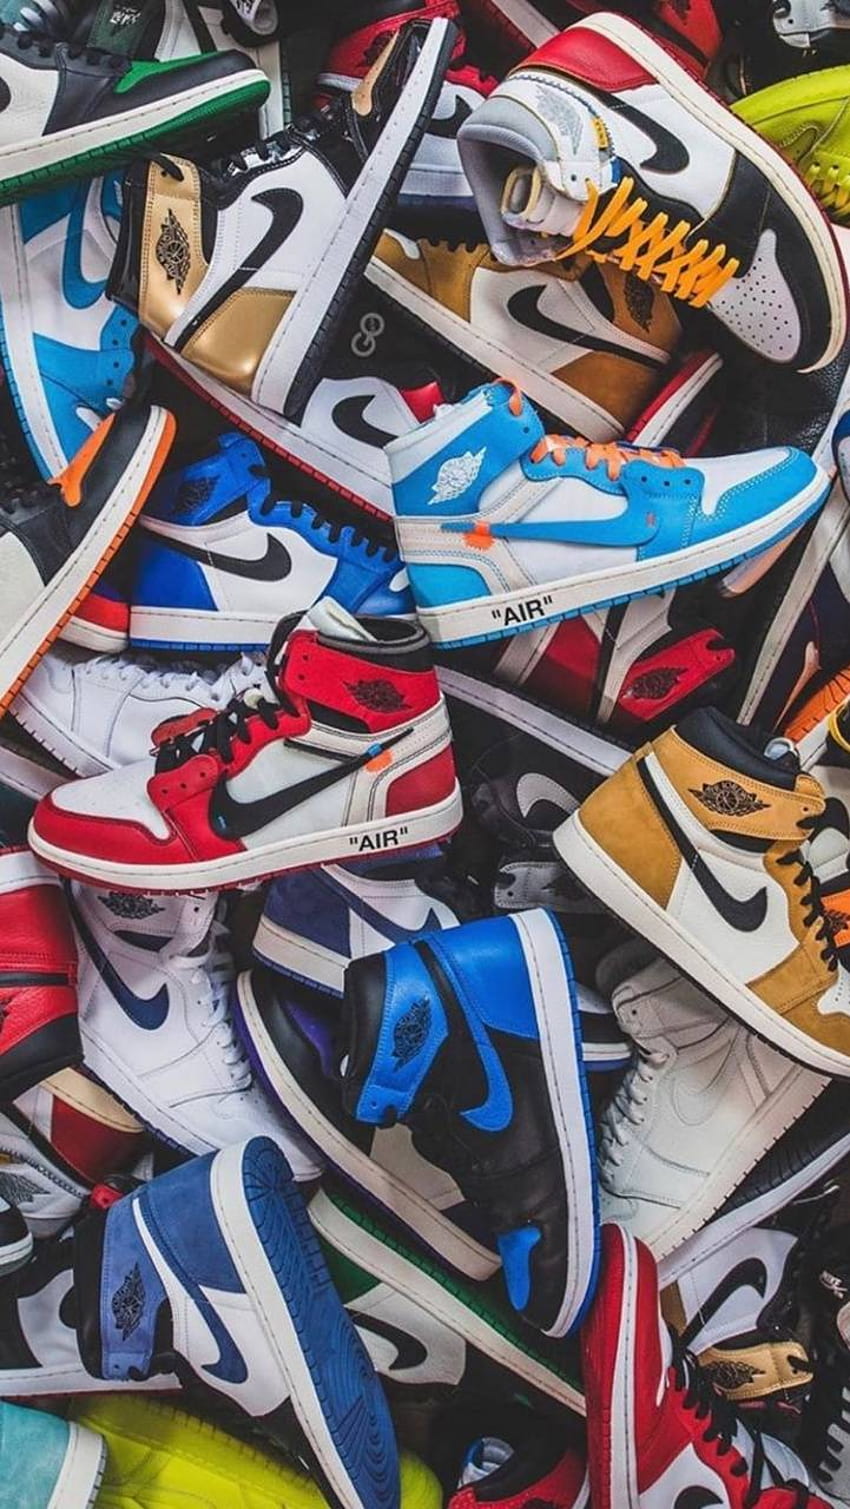 Off White Shoes posted by Michelle Tremblay, jordan 1 off white HD ...